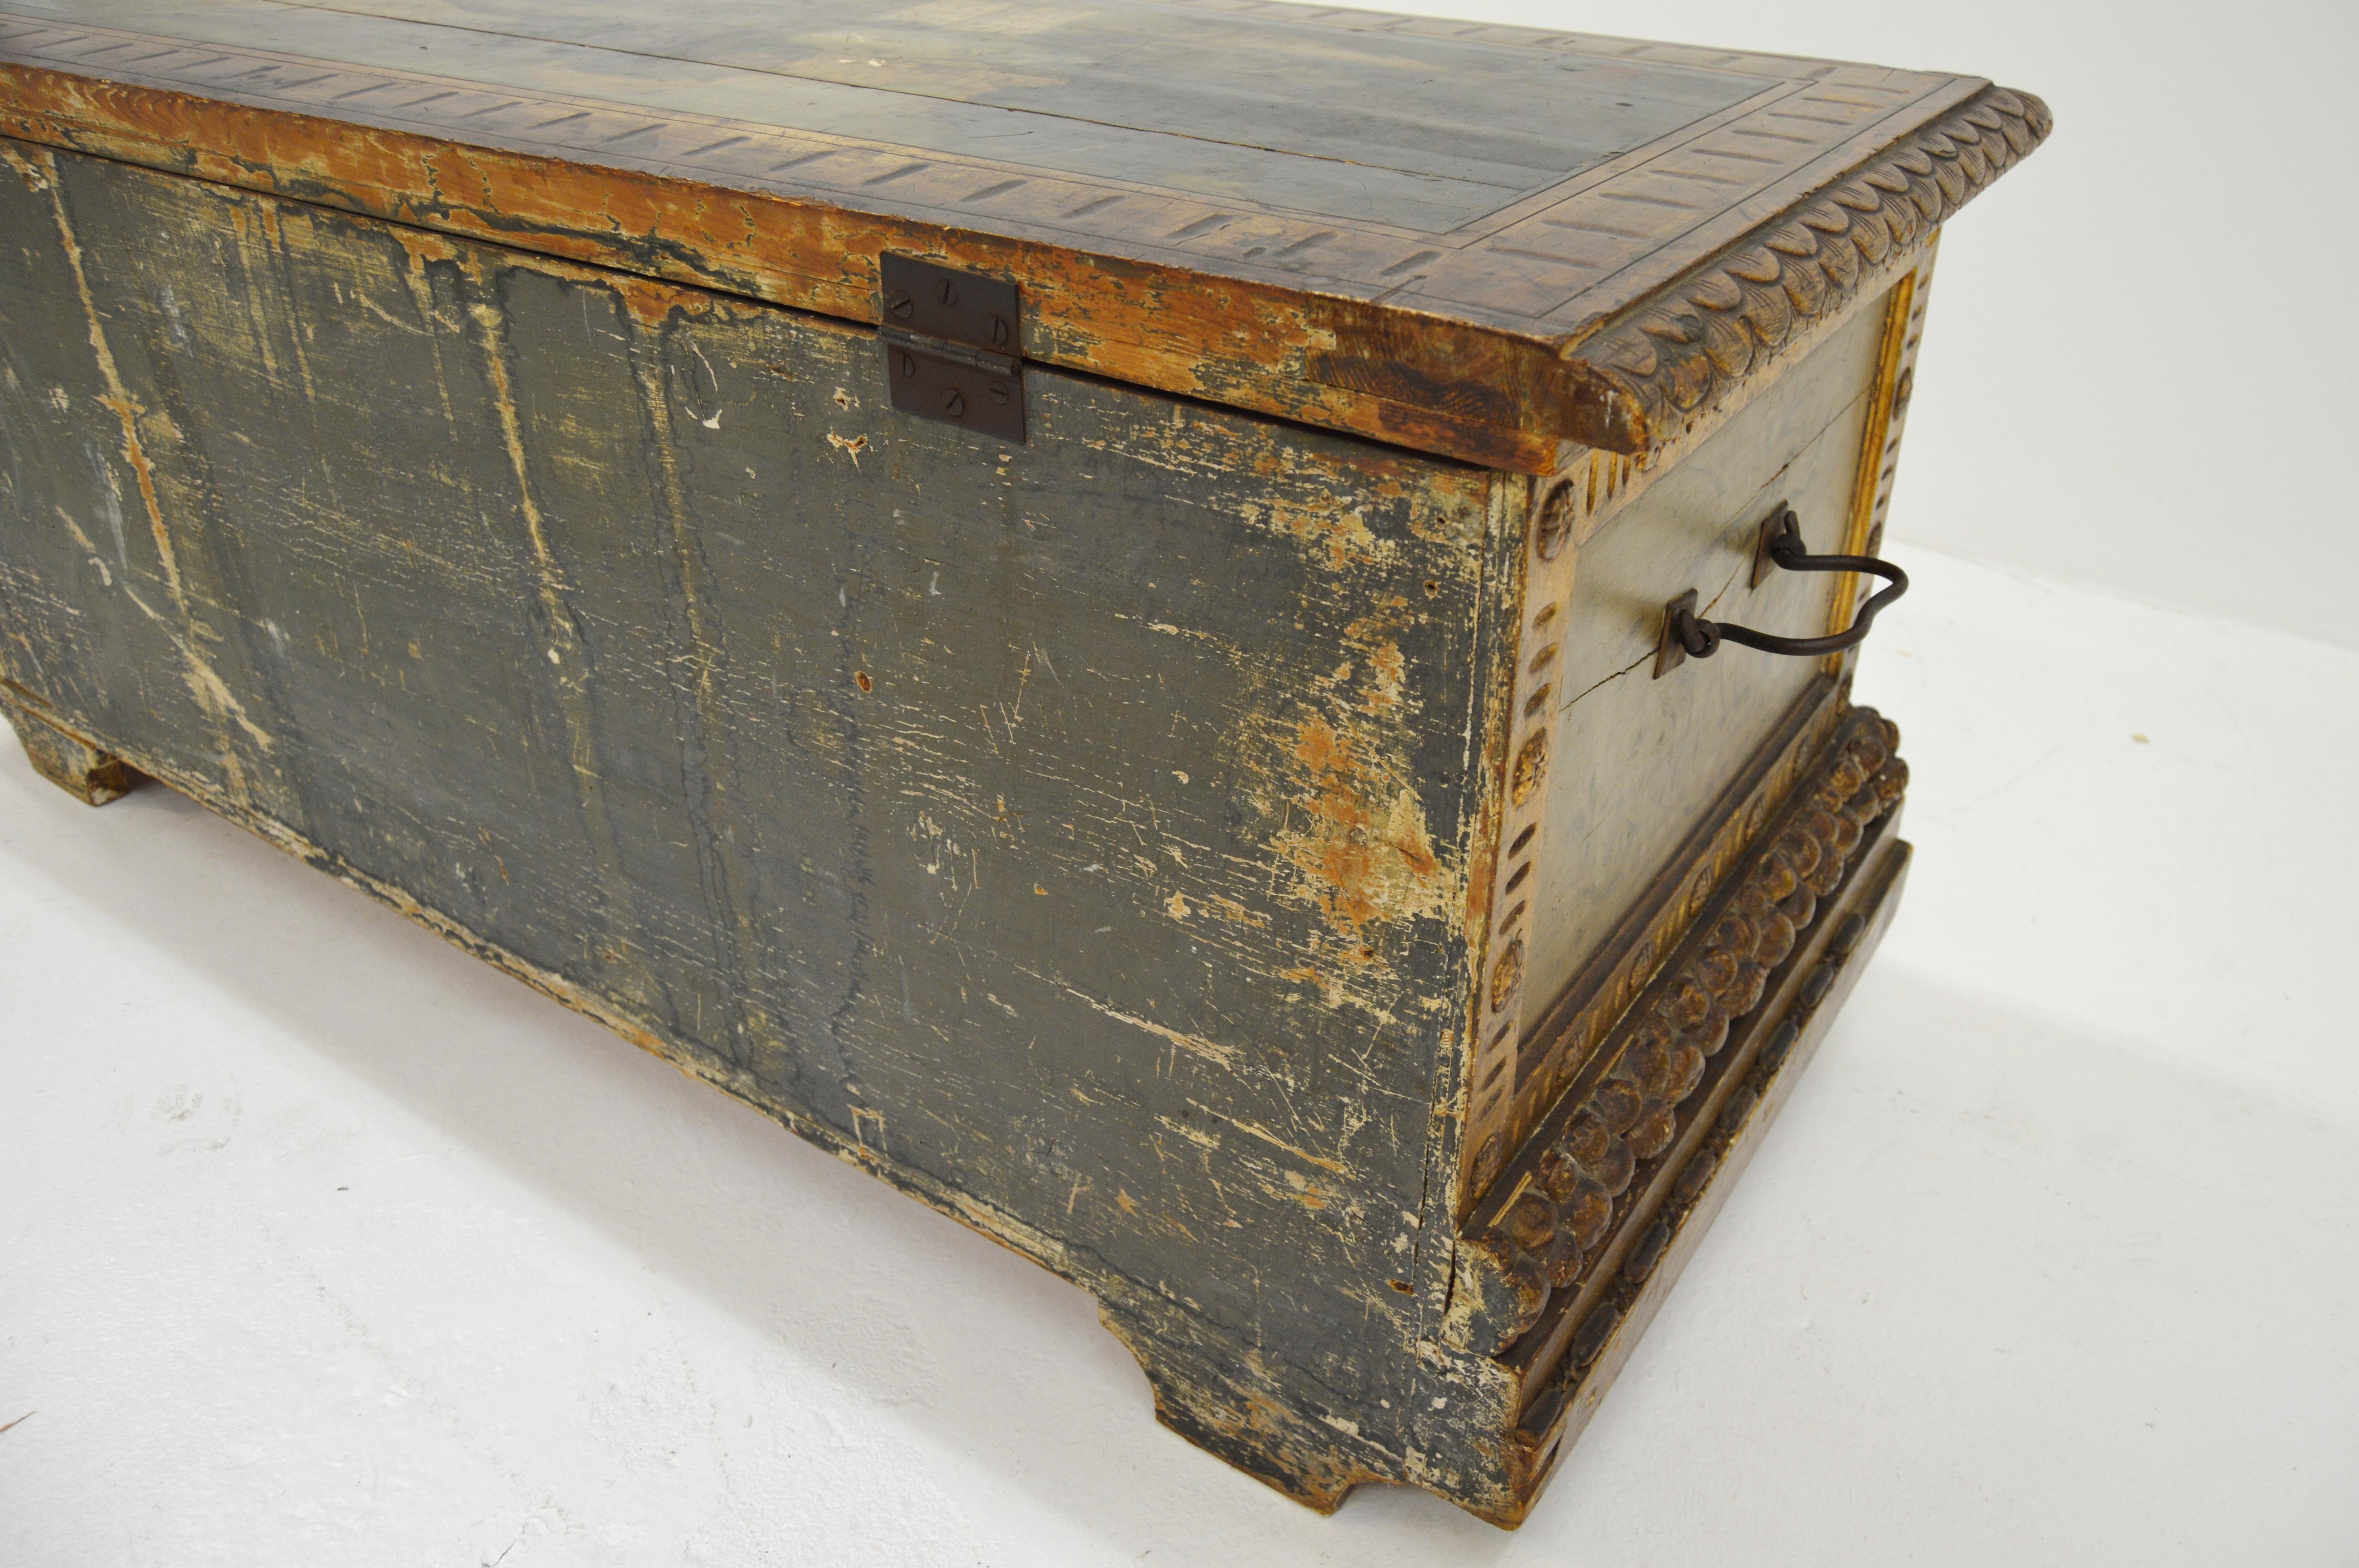 Italian Renaissance Style Carved and painted Florentine Cassone Floor Trunk For Sale 1